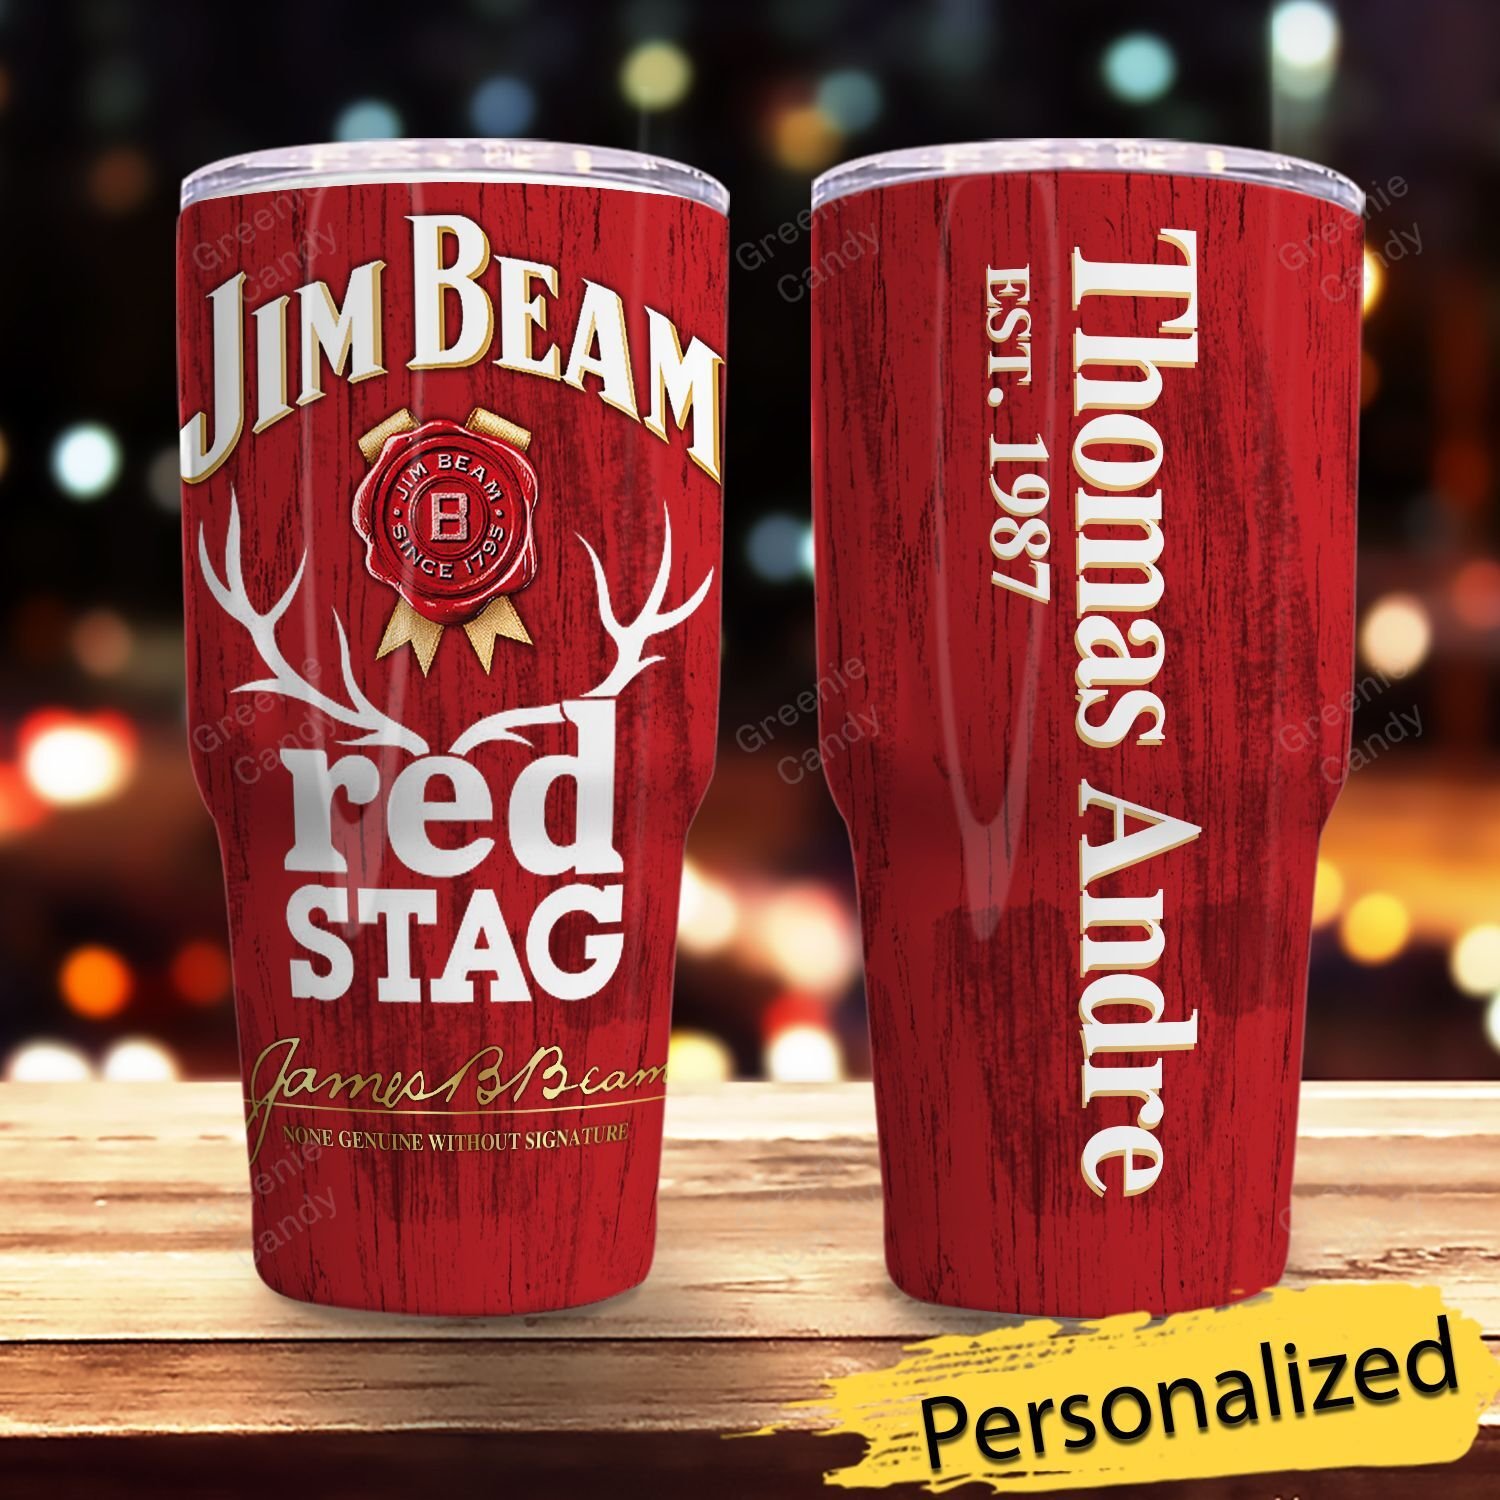 Personalized_Jim_Beam_Red_Stag_Whiskey_Tumbler_1